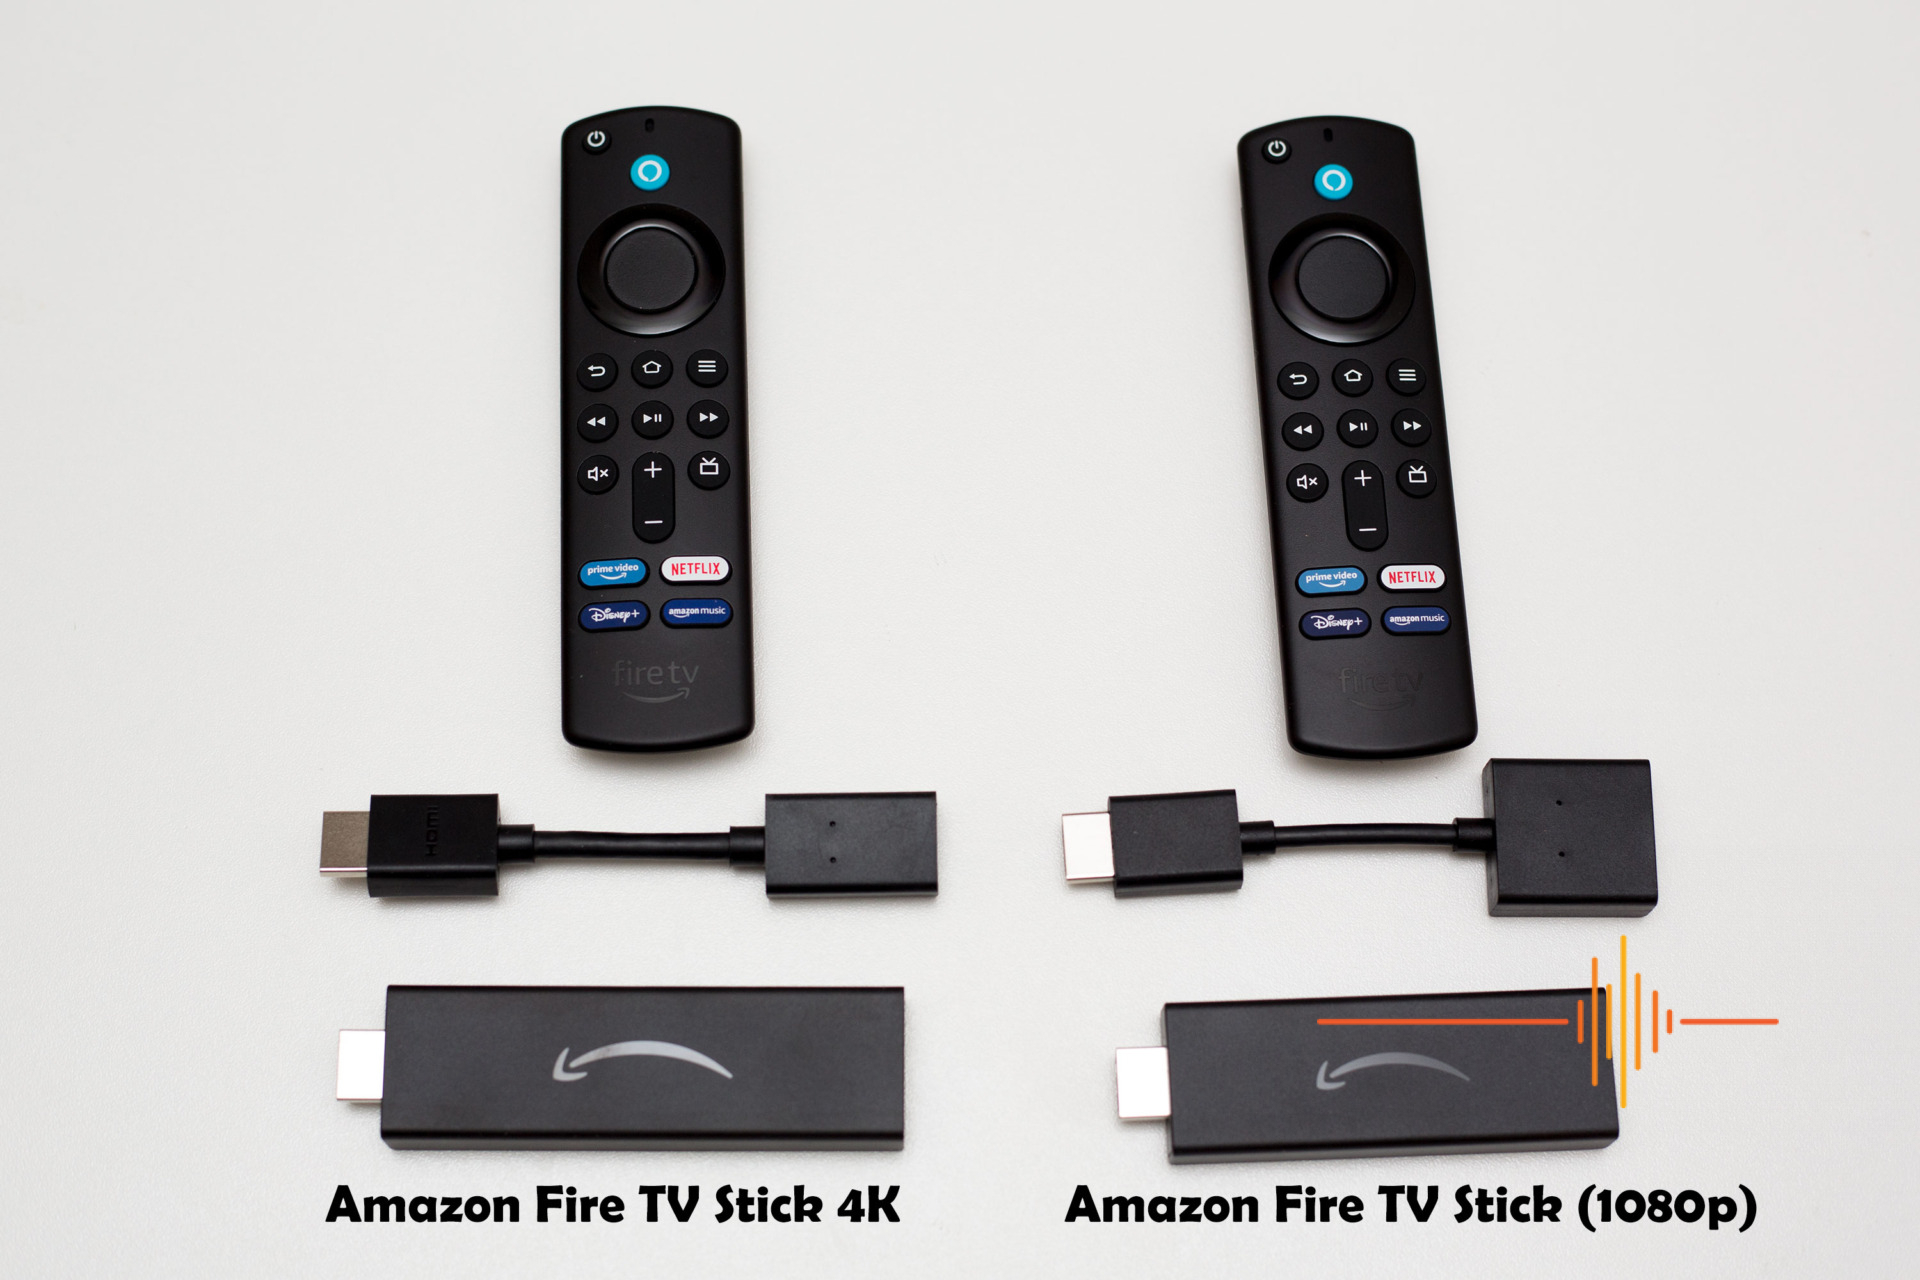 With Xiaomi's Mi TV Stick turn your dumb TV into a smarter one at